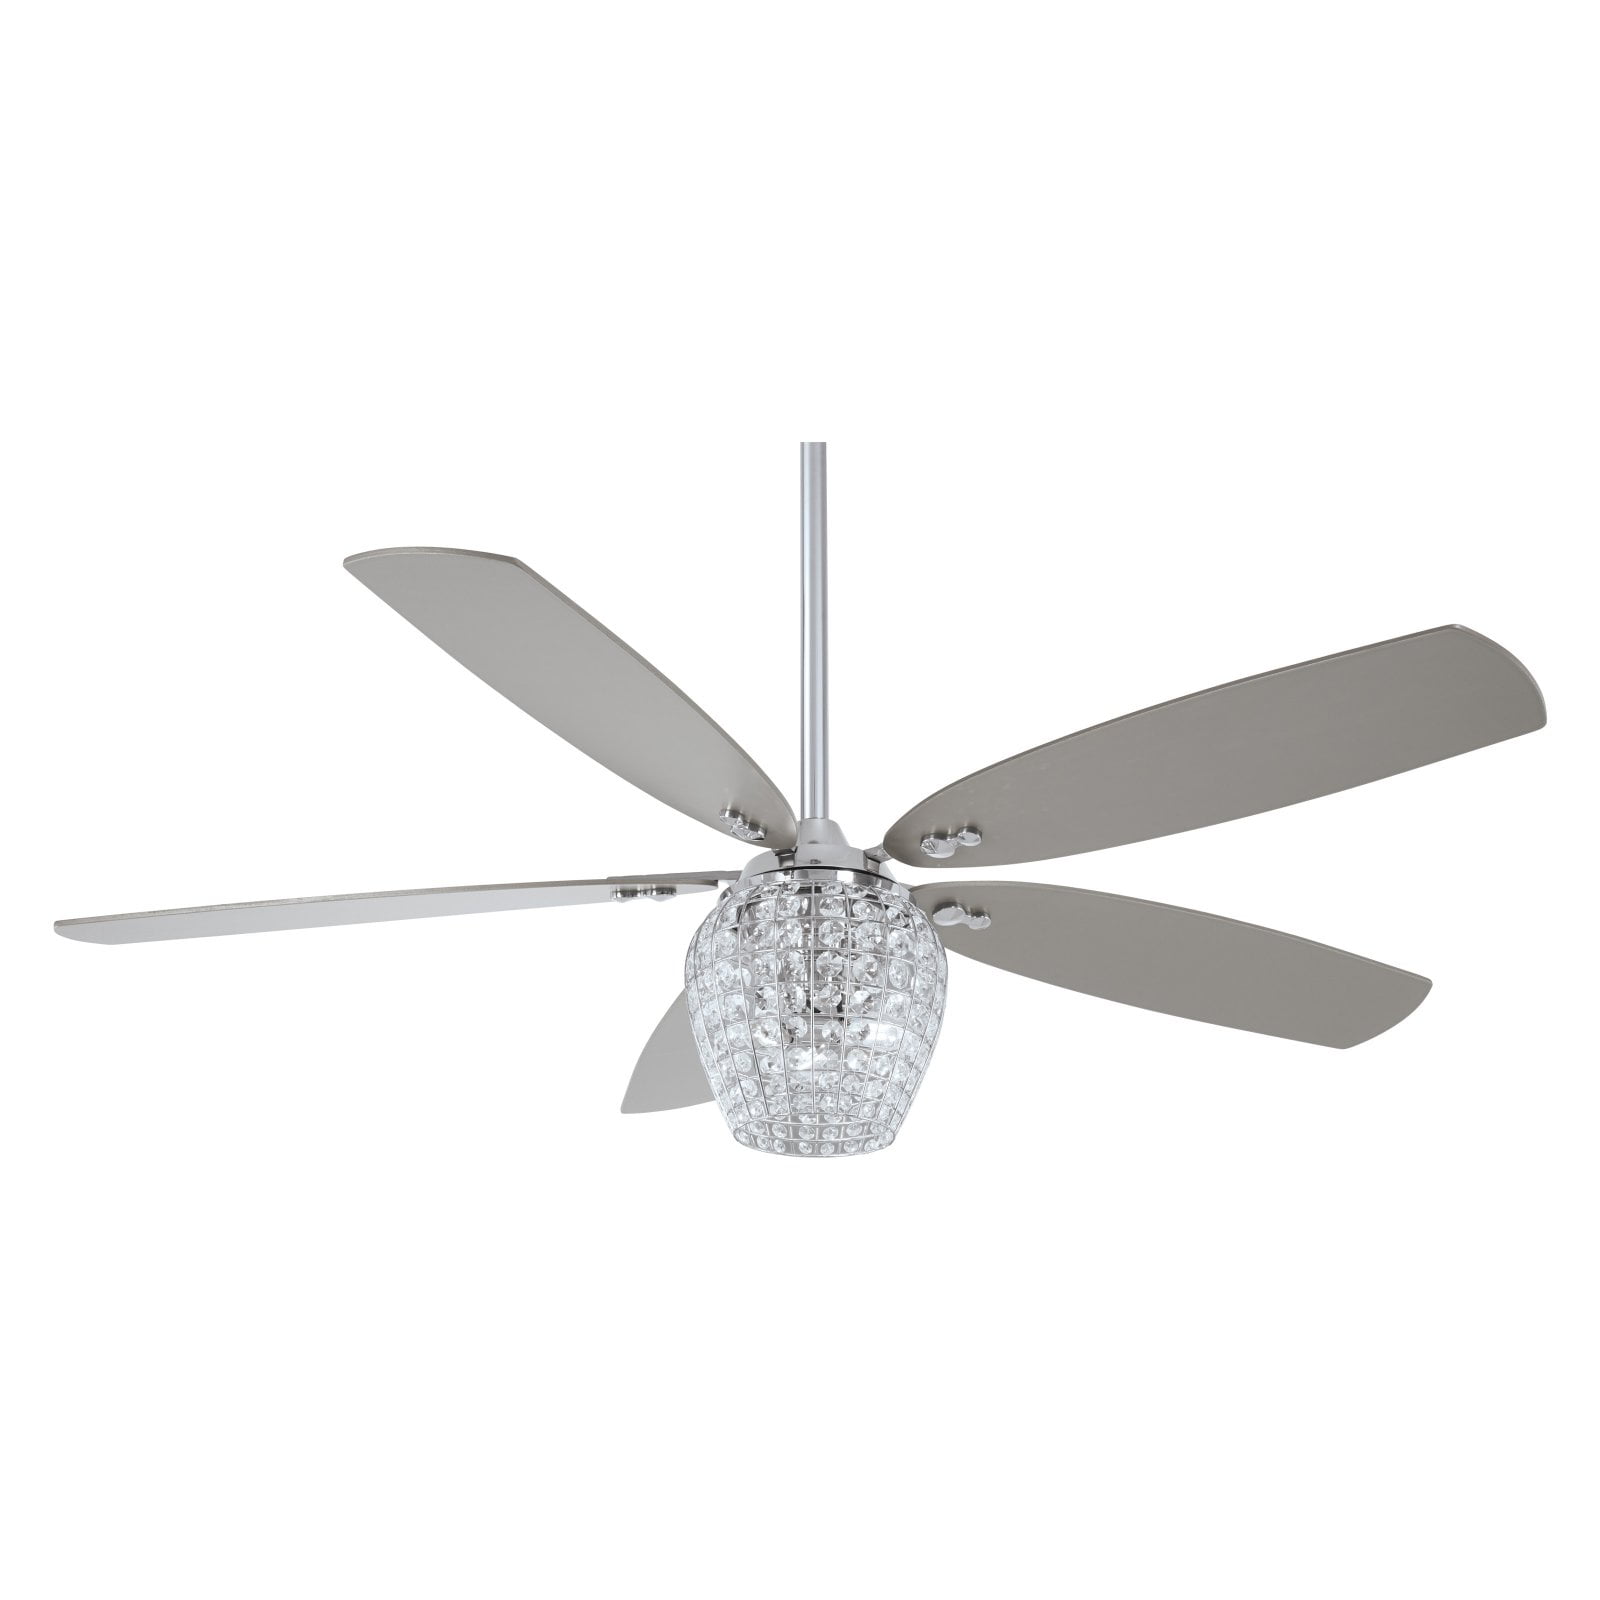 Minka Aire Bling 56 In Ceiling Fan With Led Light Walmart Com